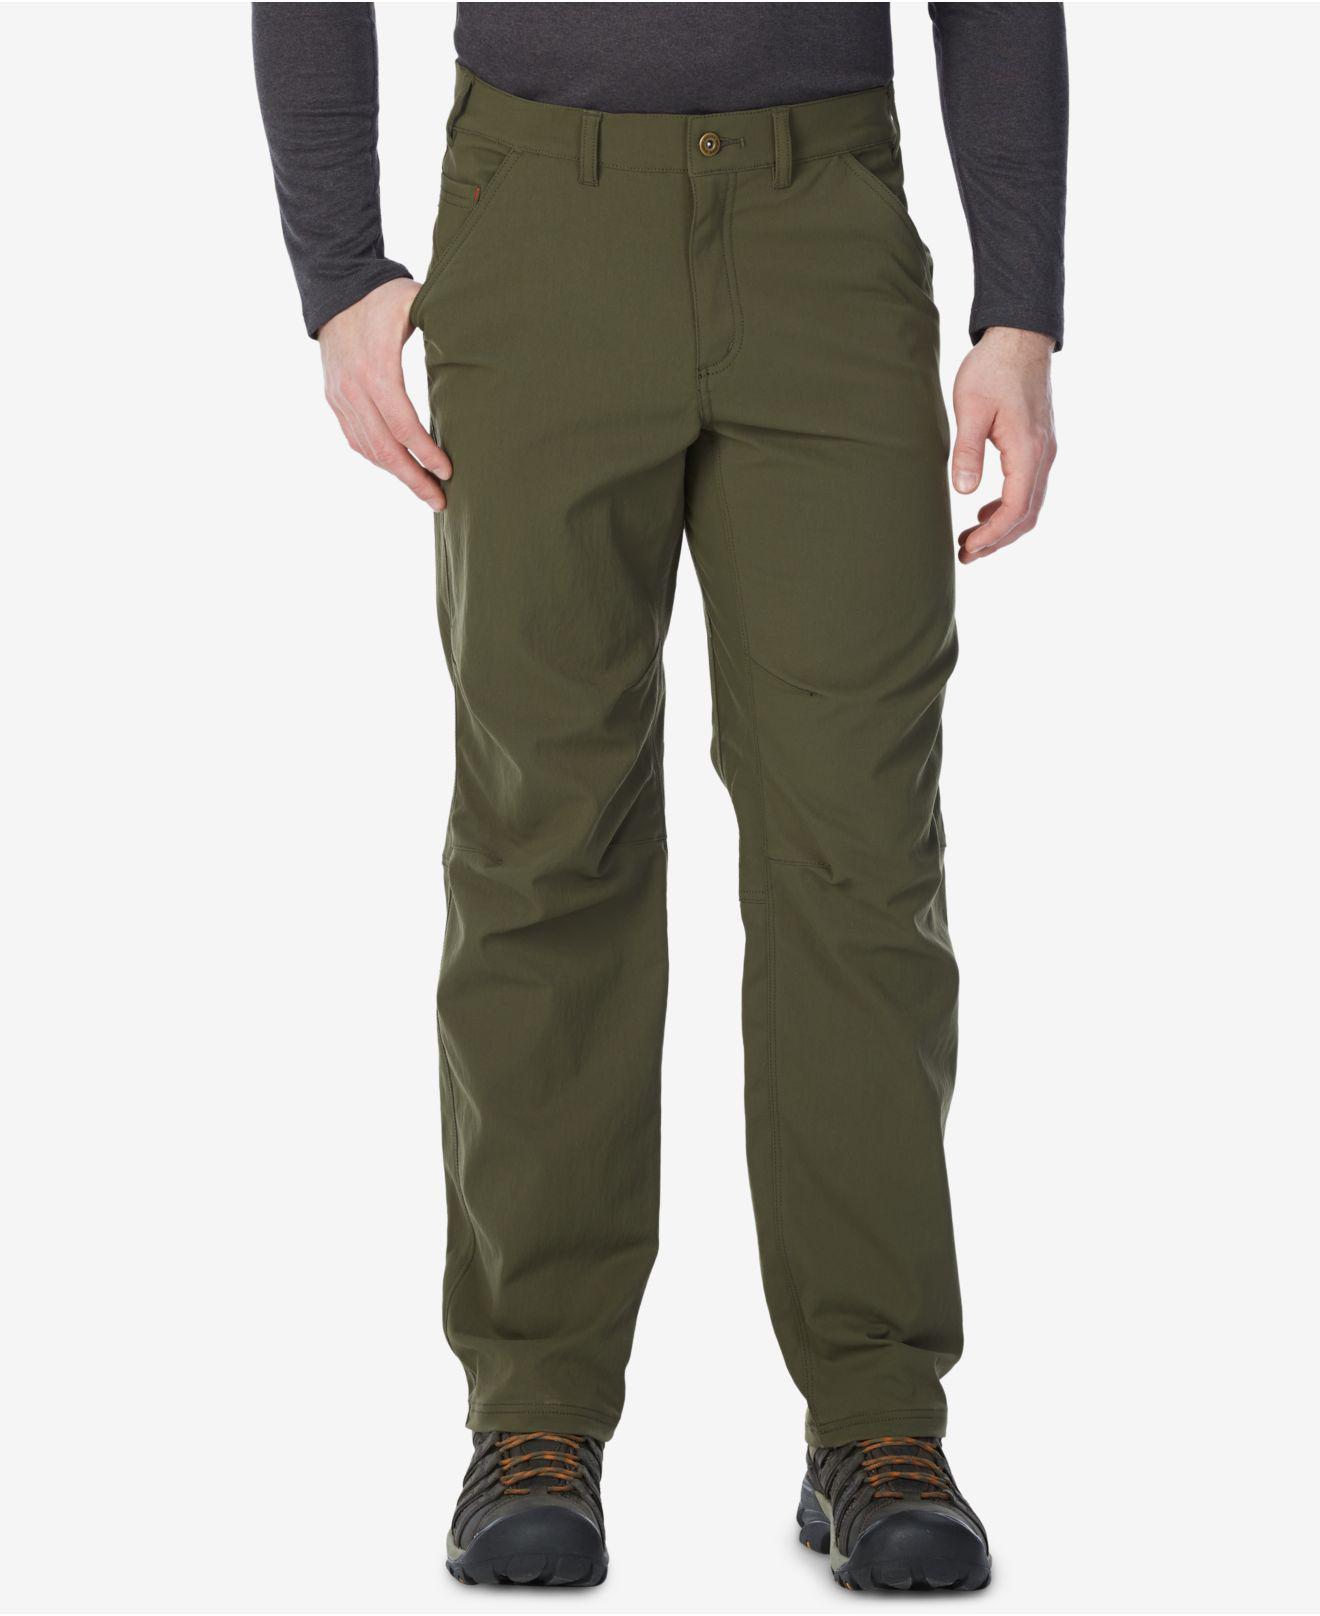 Lyst - Eastern Mountain Sports Mountain Life Pants in Green for Men